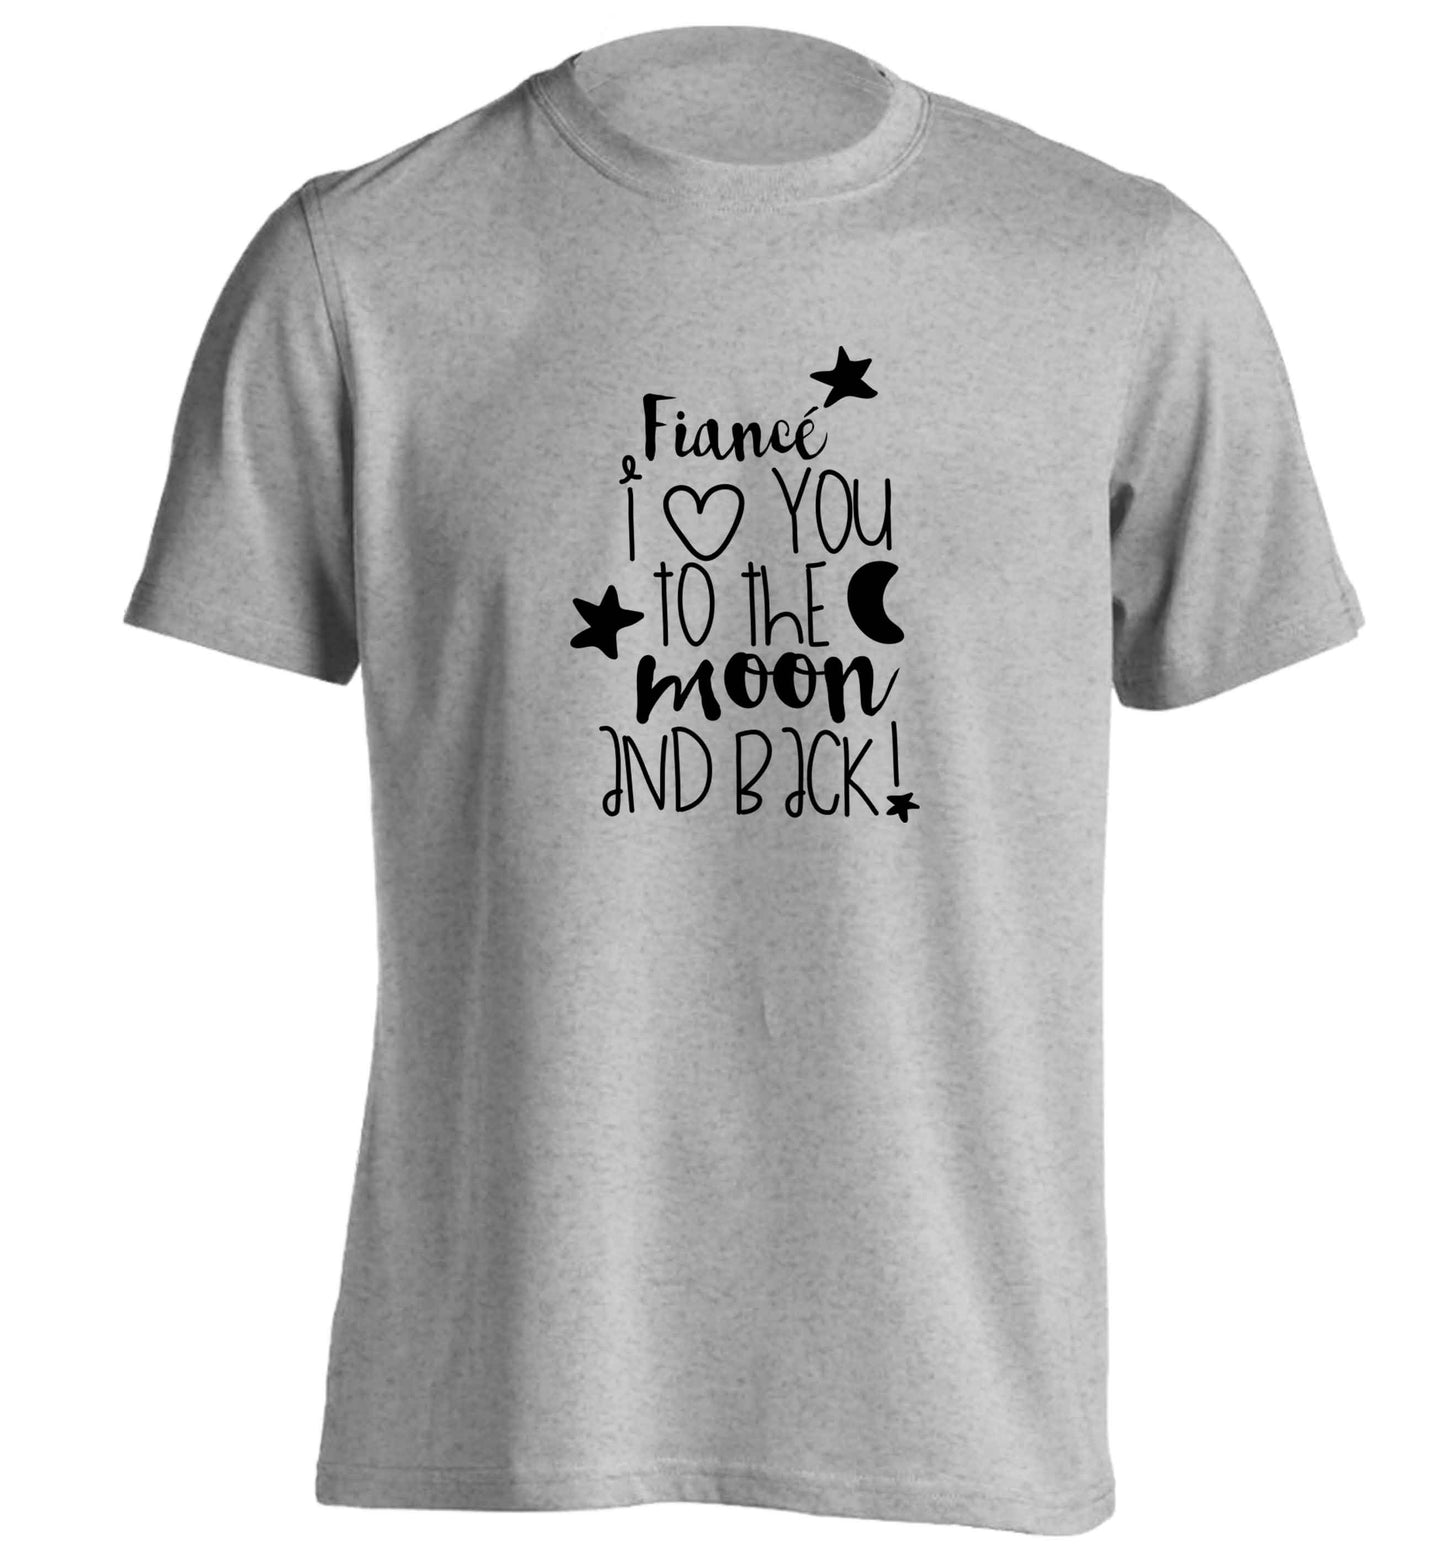 Fianc√© I love you to the moon and back adults unisex grey Tshirt 2XL